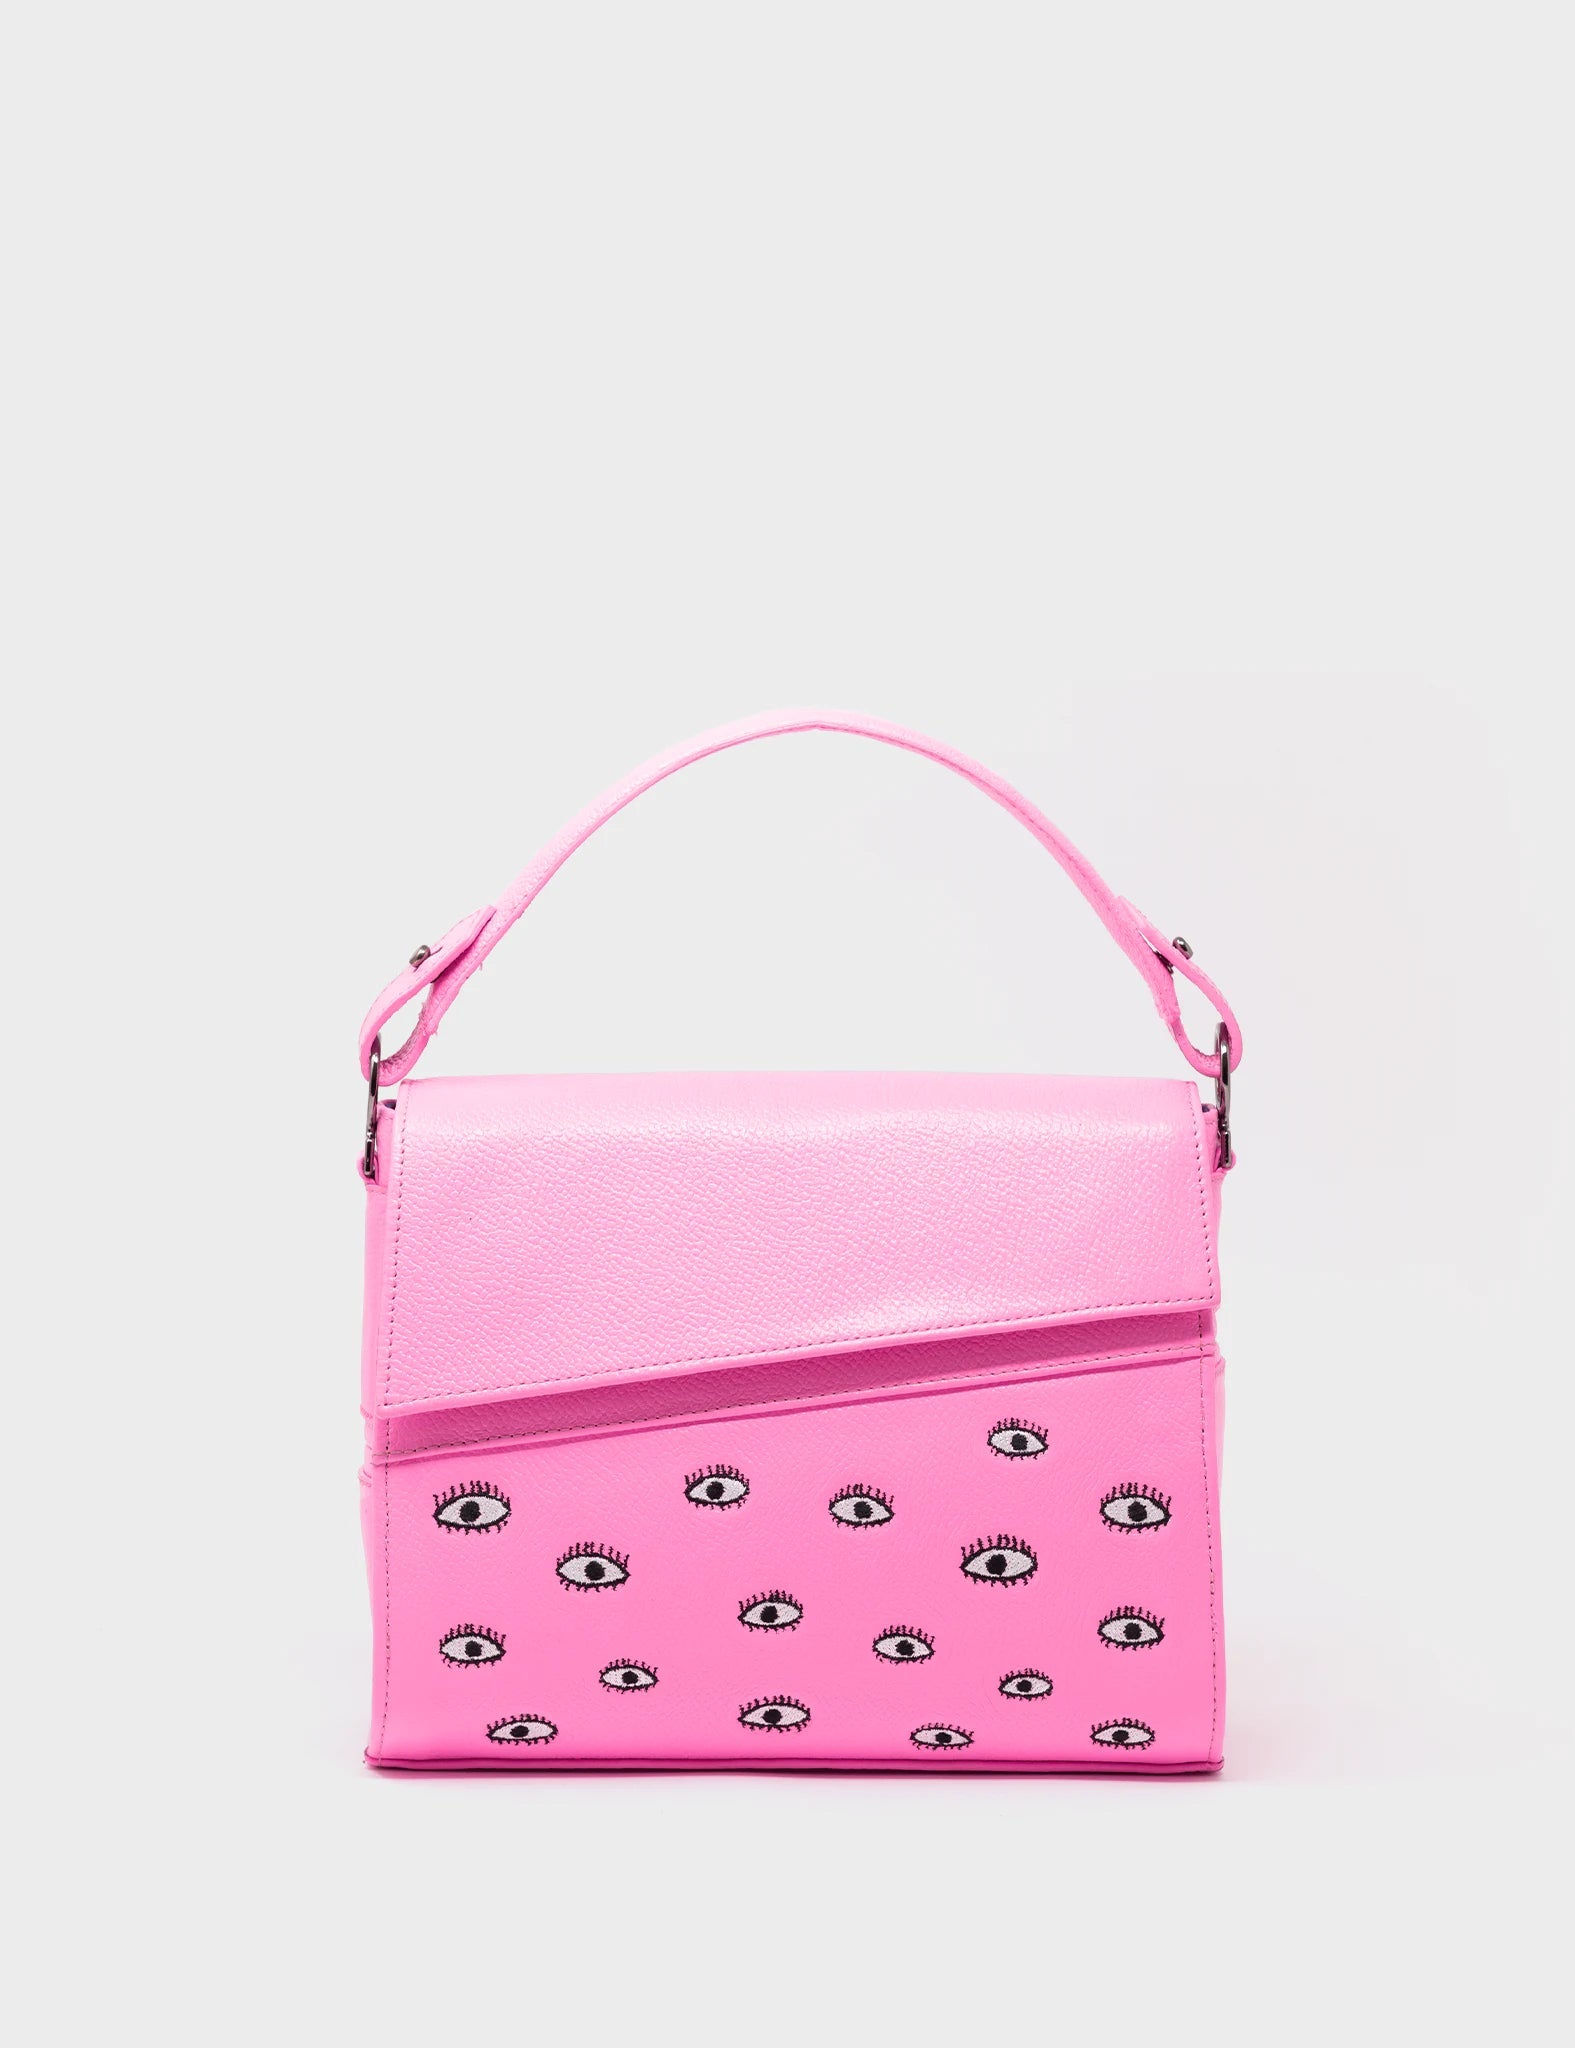 Anastasio Mini Crossbody Handbag Bubblegum Pink Leather - All Over Eyes Embroidery - Front view